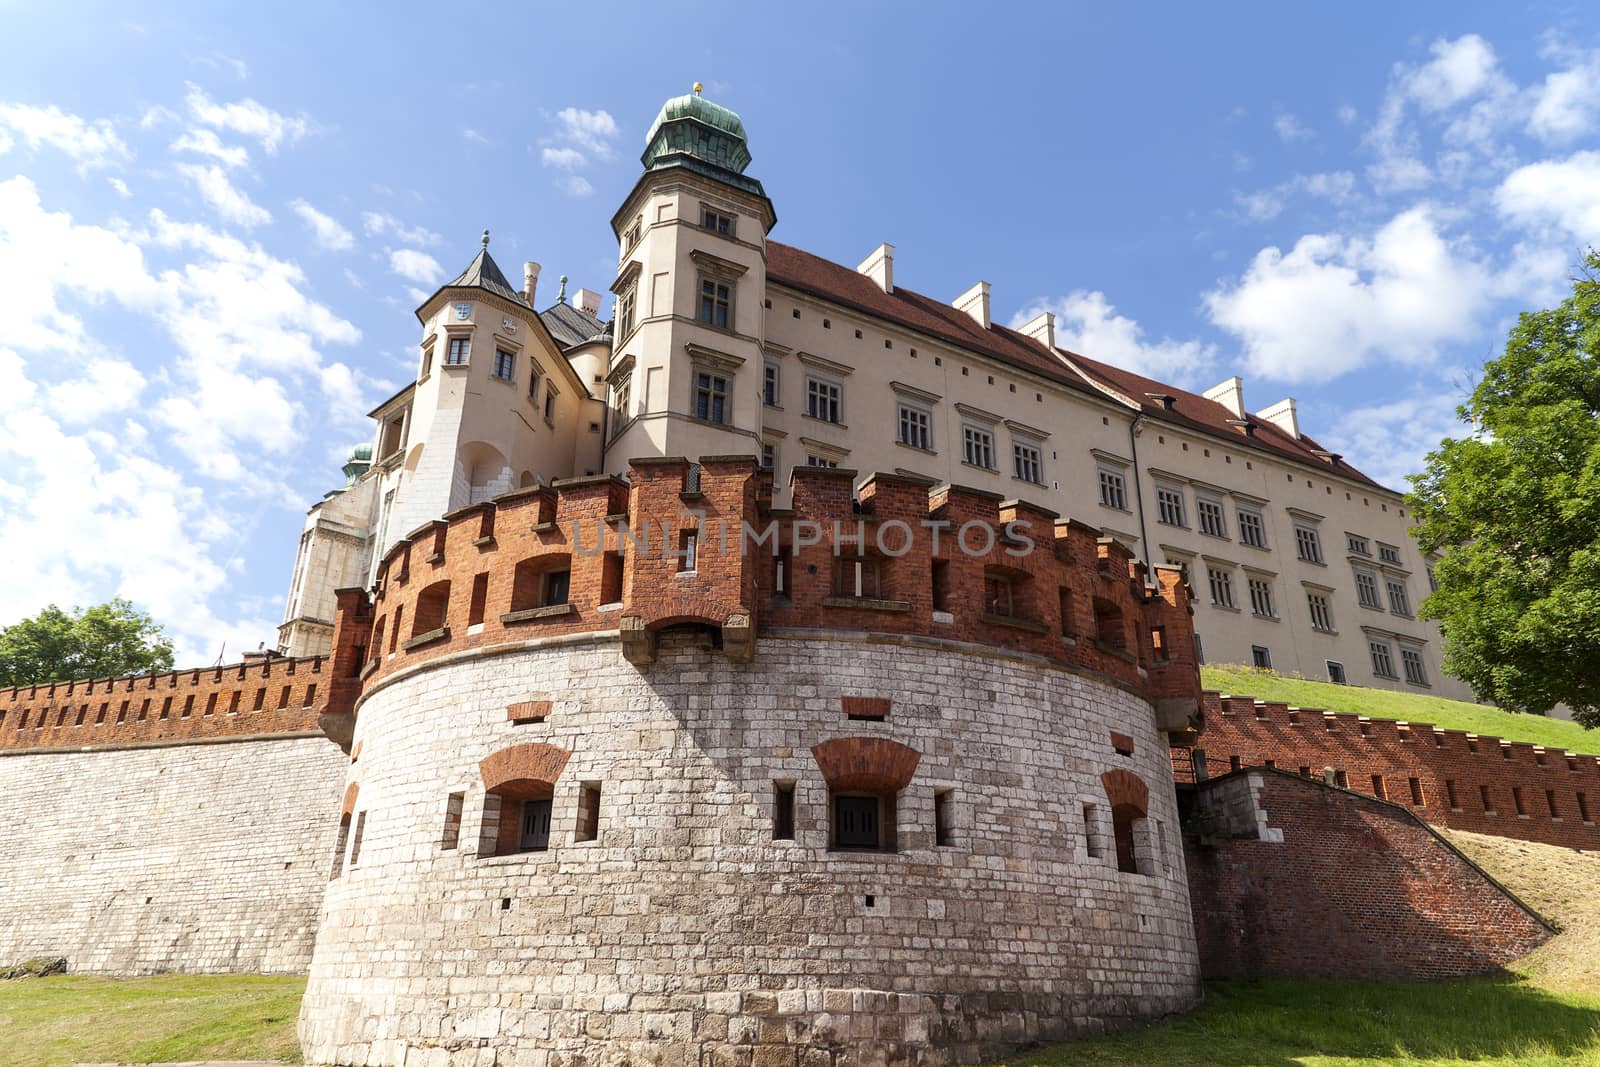 Wawel Royal Castle with defensive wall, Krakow, Poland